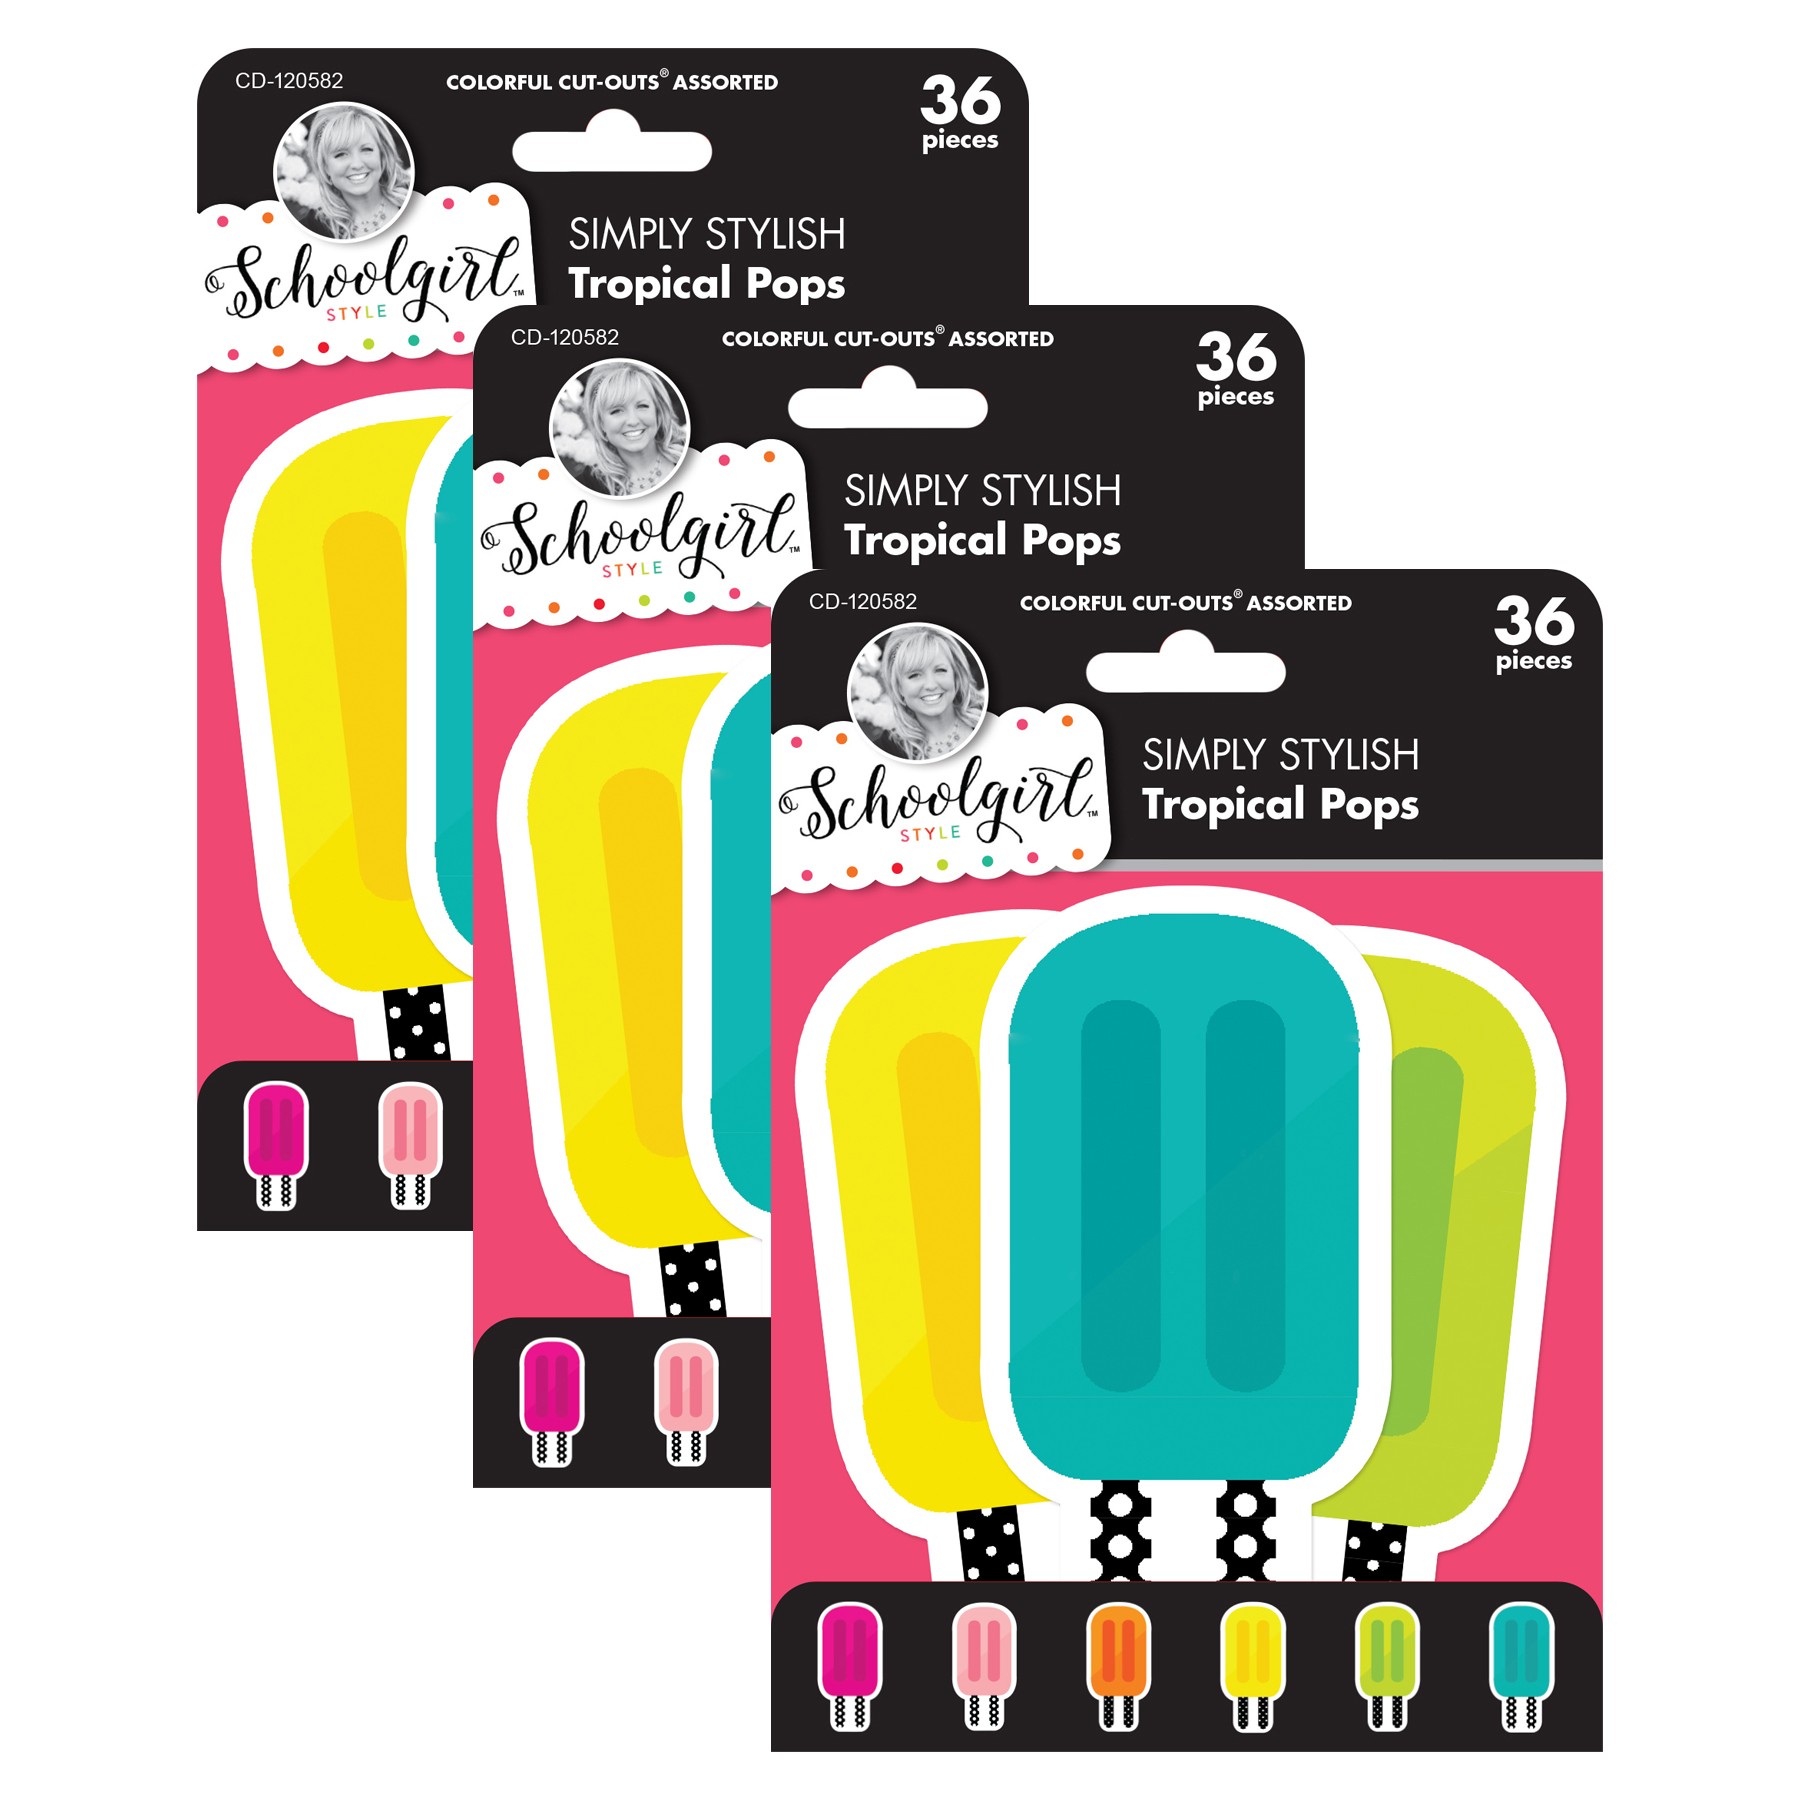 Simply Stylish Tropical Pops Cut-Outs, 36 Per Pack, 3 Packs